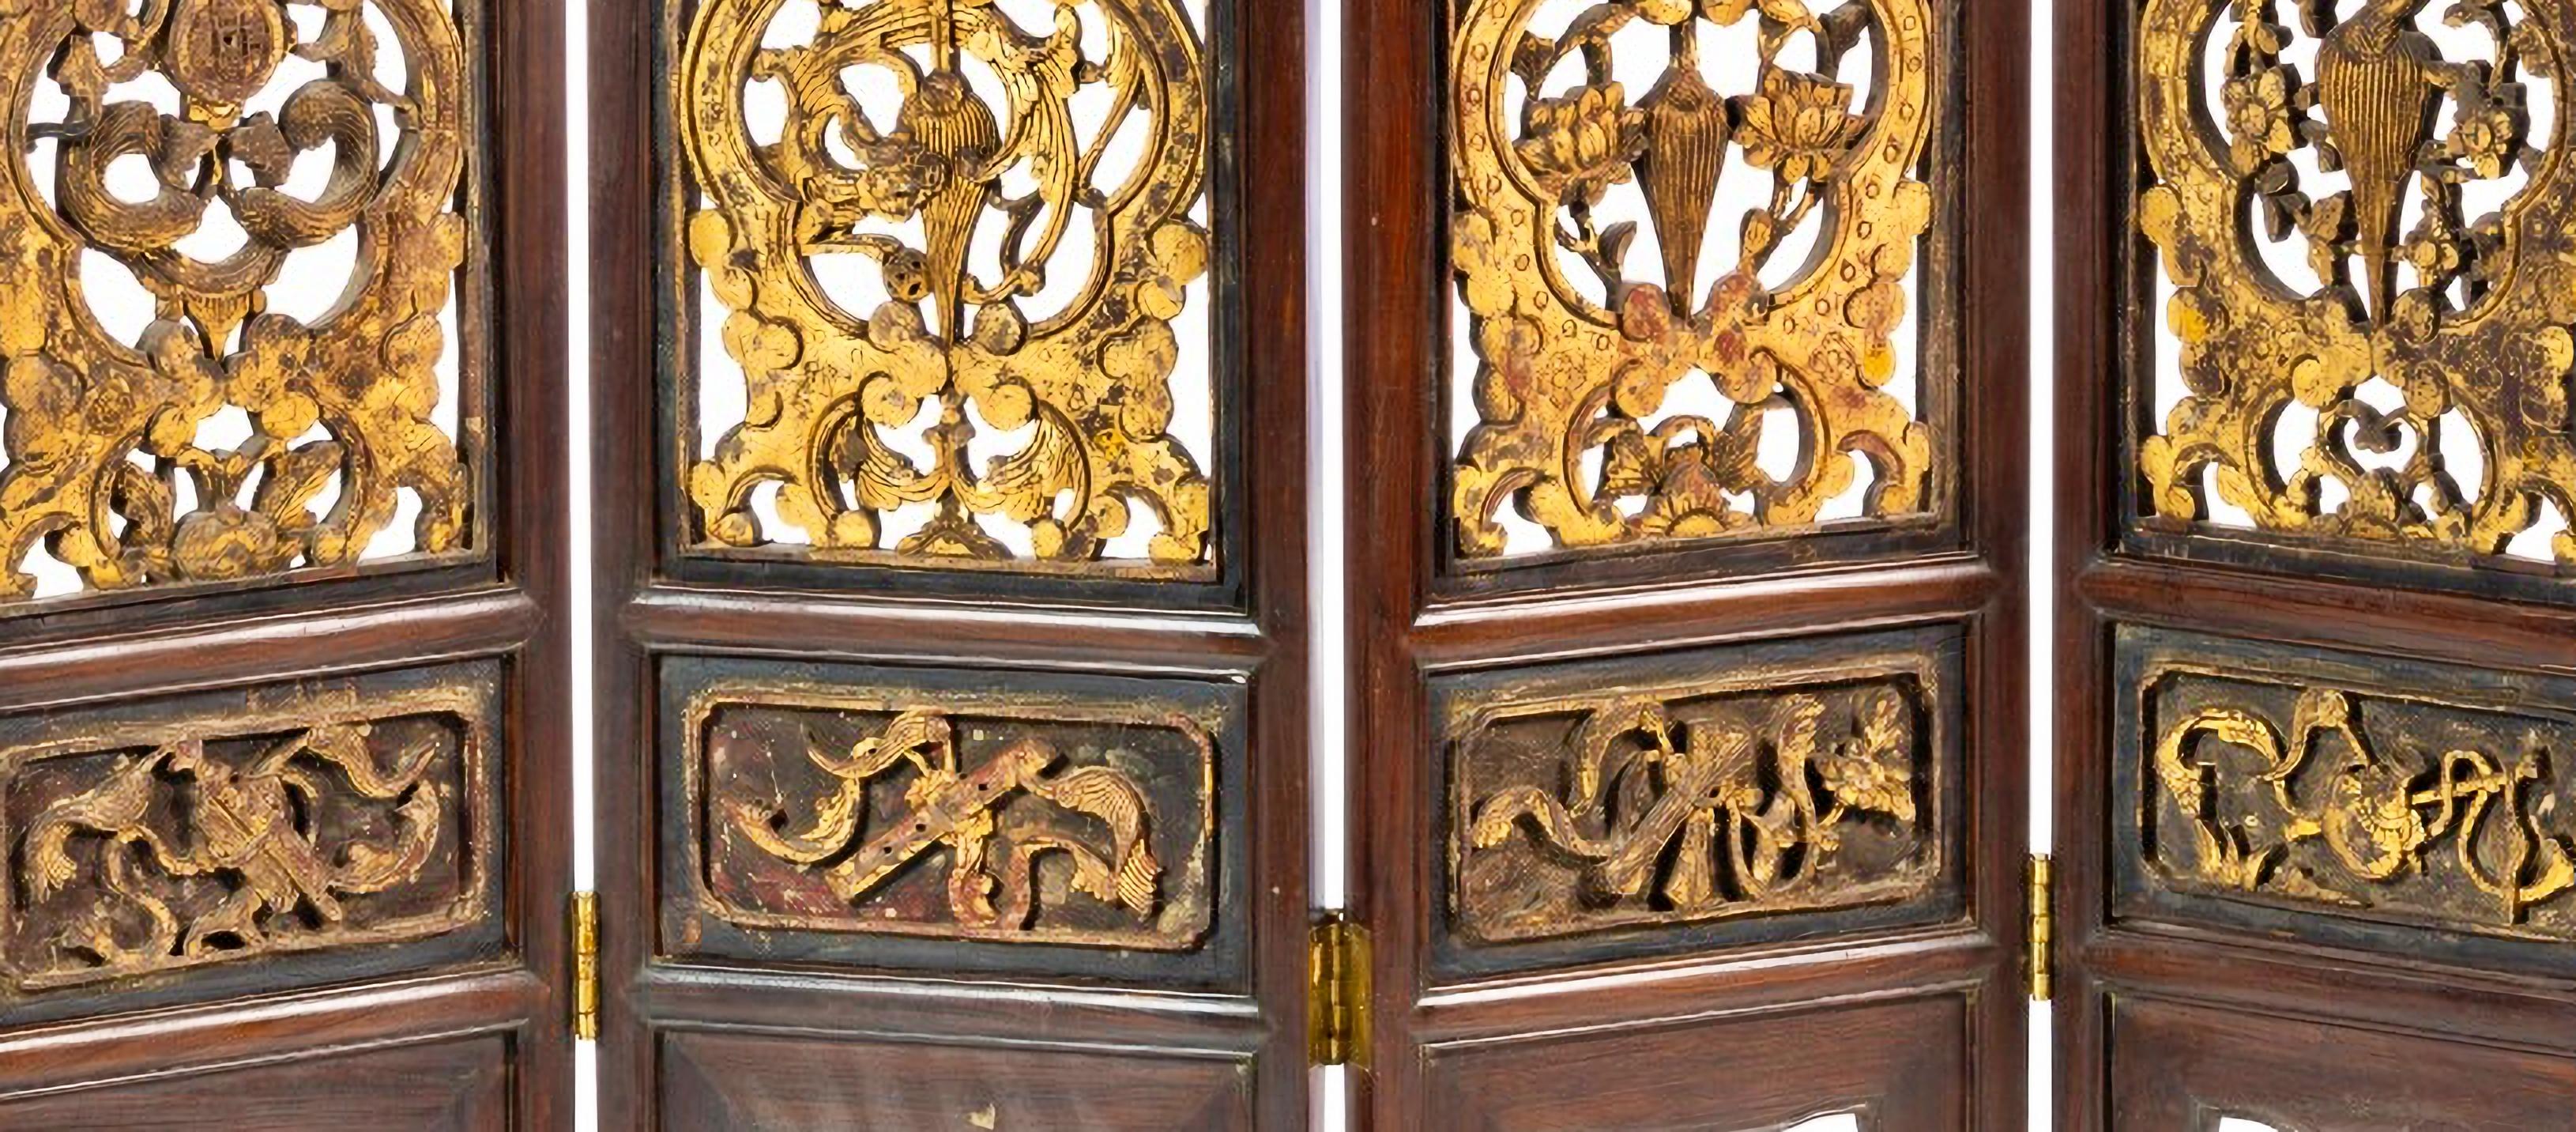 FOUR-LEAF SEPARE

Chinese 19th Century
with hardwood carvings, gilt and bronze hinges.
Dim.: 186 x 164 cm
good condition